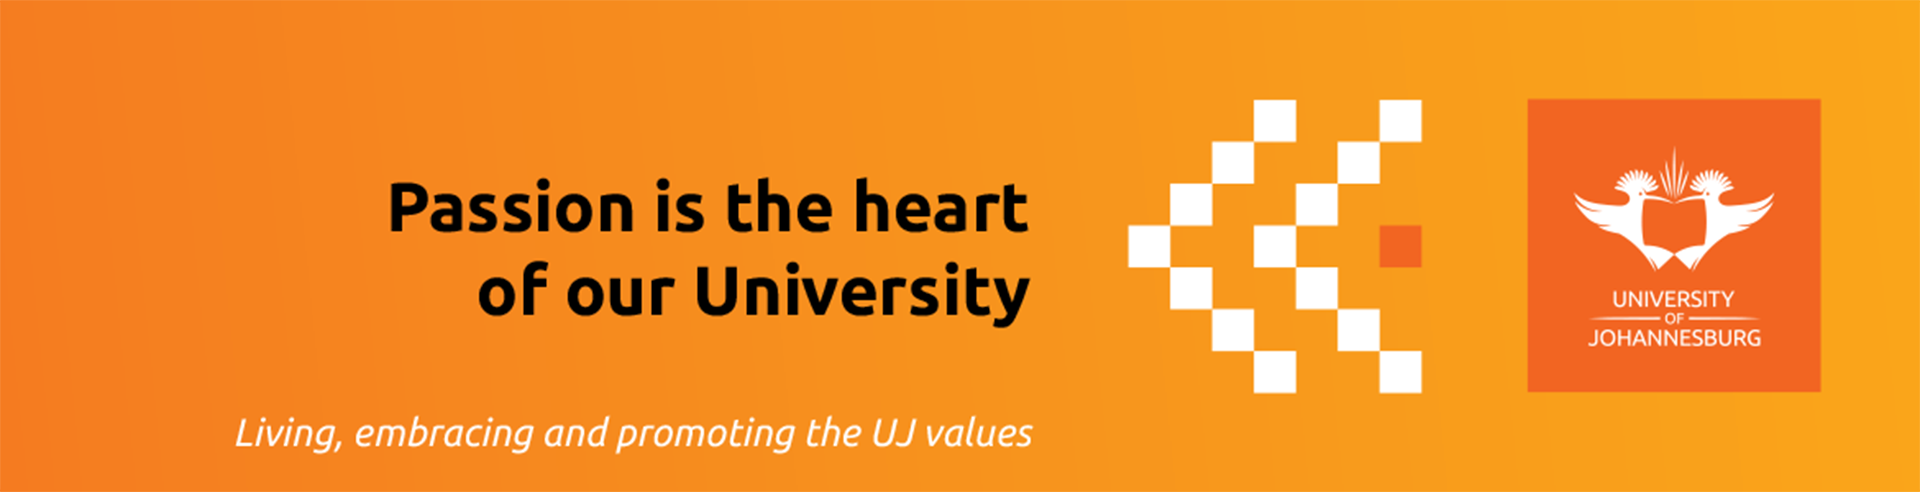 Uj Values Expressions Posters 2020 Ulink 1170x300mm 23